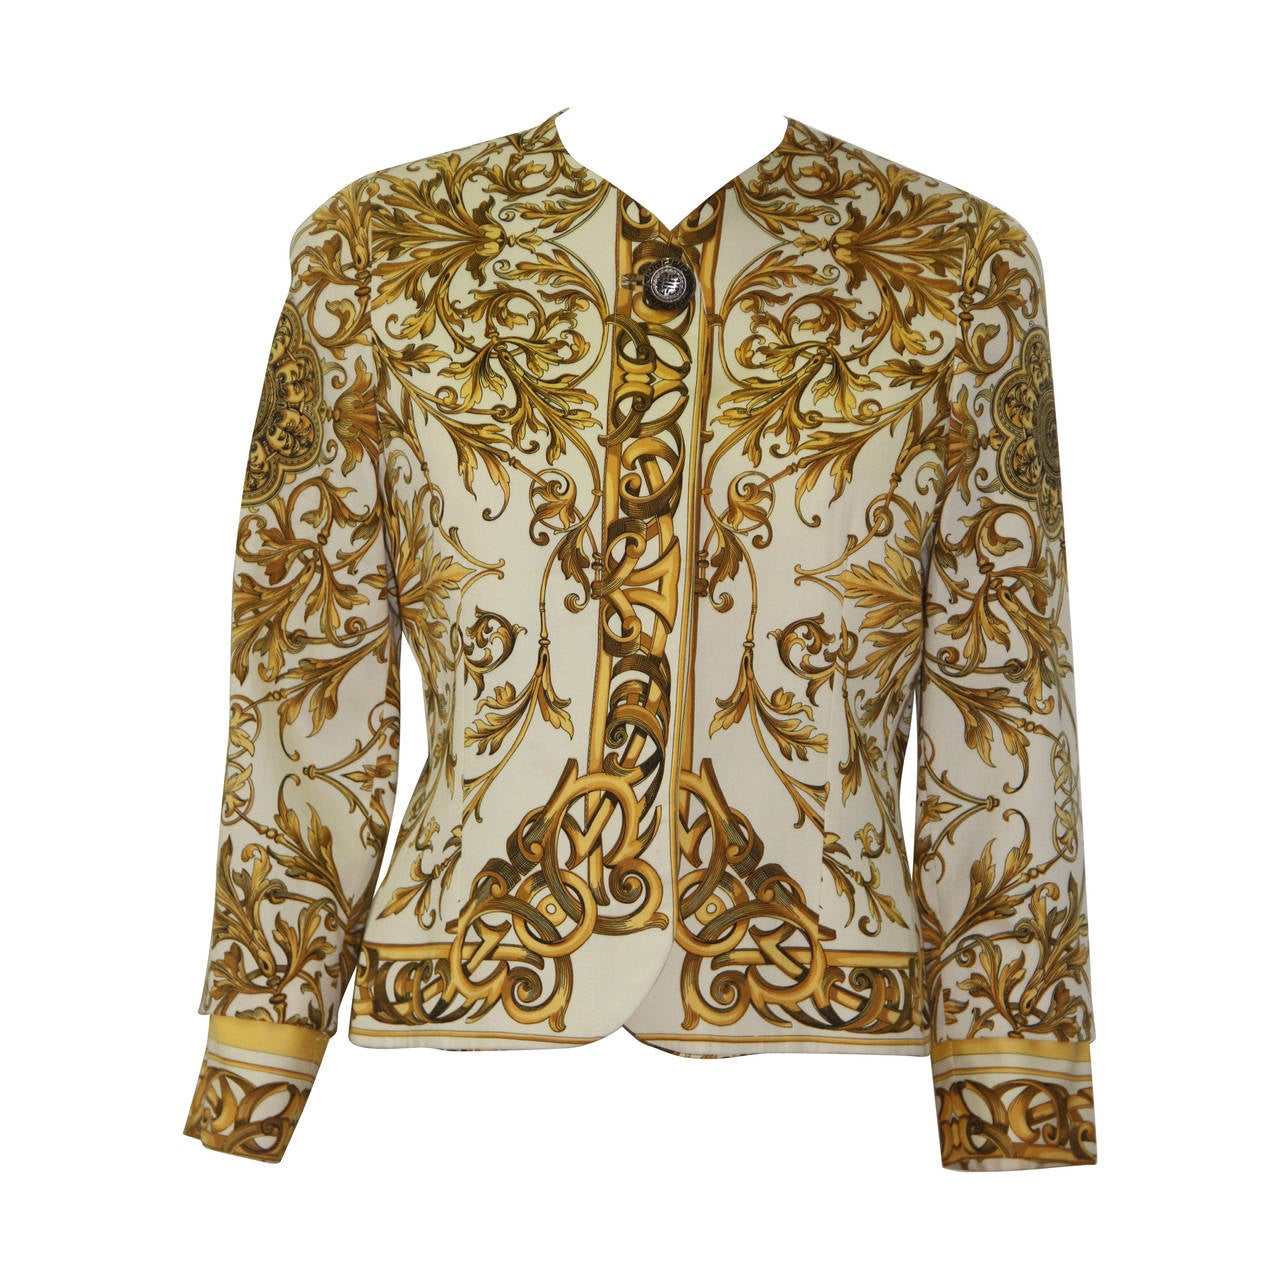 Gianni Versace Baroque Printed Jacket Spring 1992 For Sale